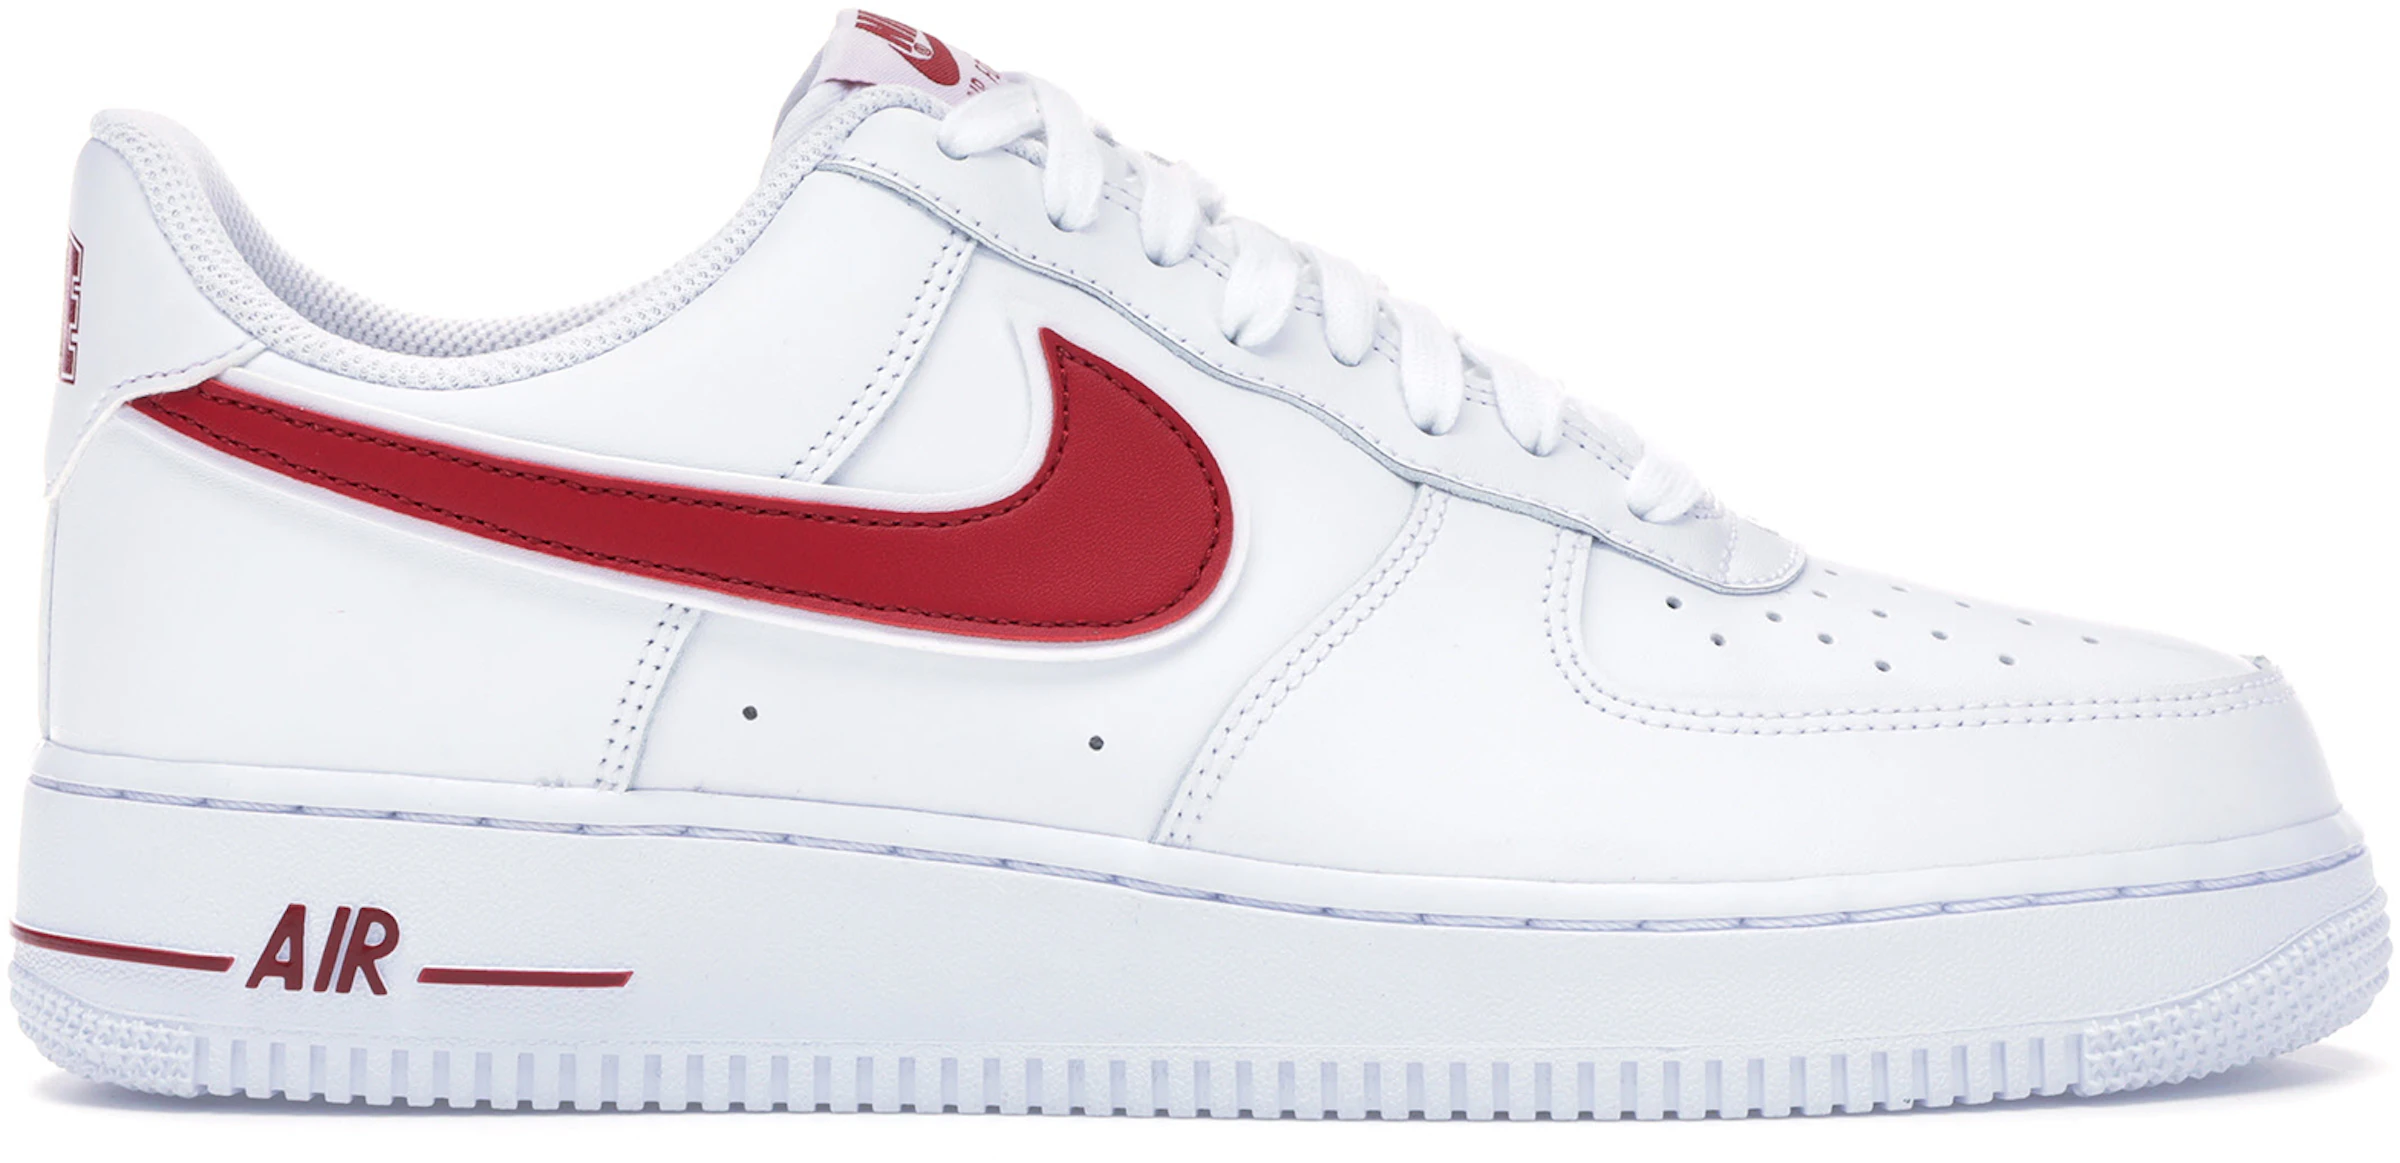 Air Force 1 Low White Gym Red - AO2423-102 ES